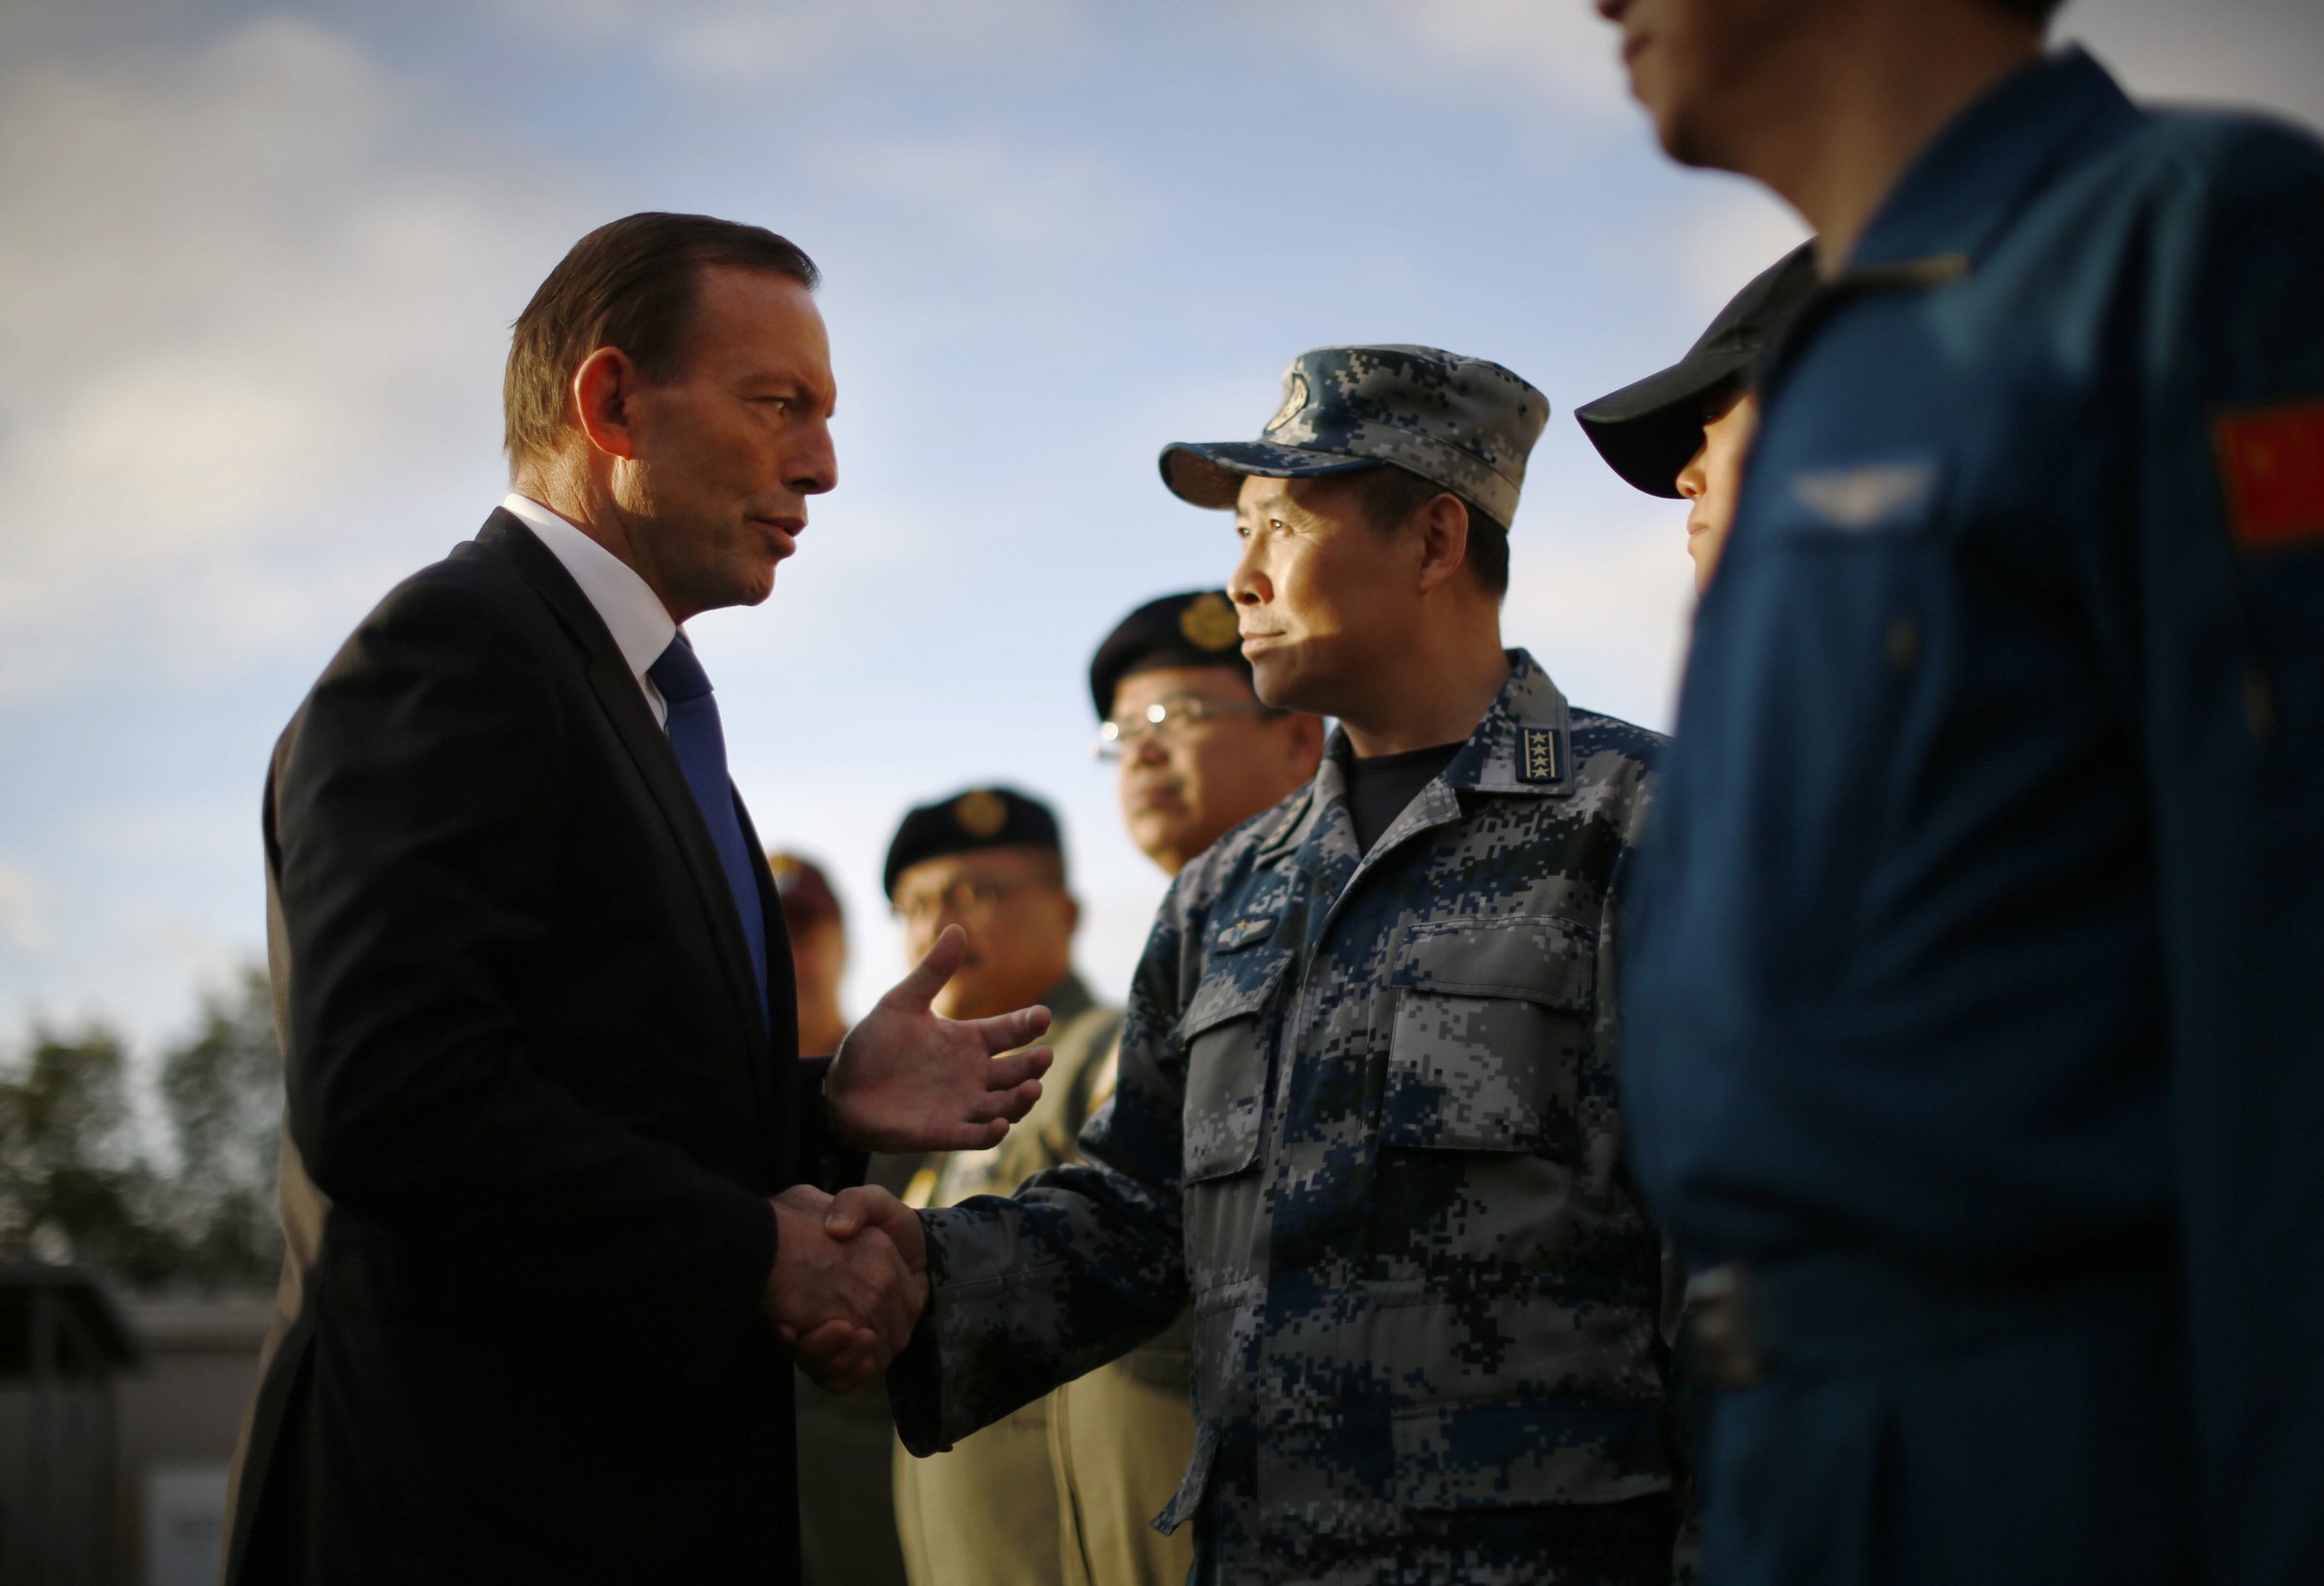 Australian Prime Minister Tony Abbott speaks with China's Air Force Senior Colonel Liu Dian Jun, head of China's effort to locate Malaysia Airlines flight MH370, during his visit to RAAF Base Pearce on March 31, 2014 in Perth, Australia.